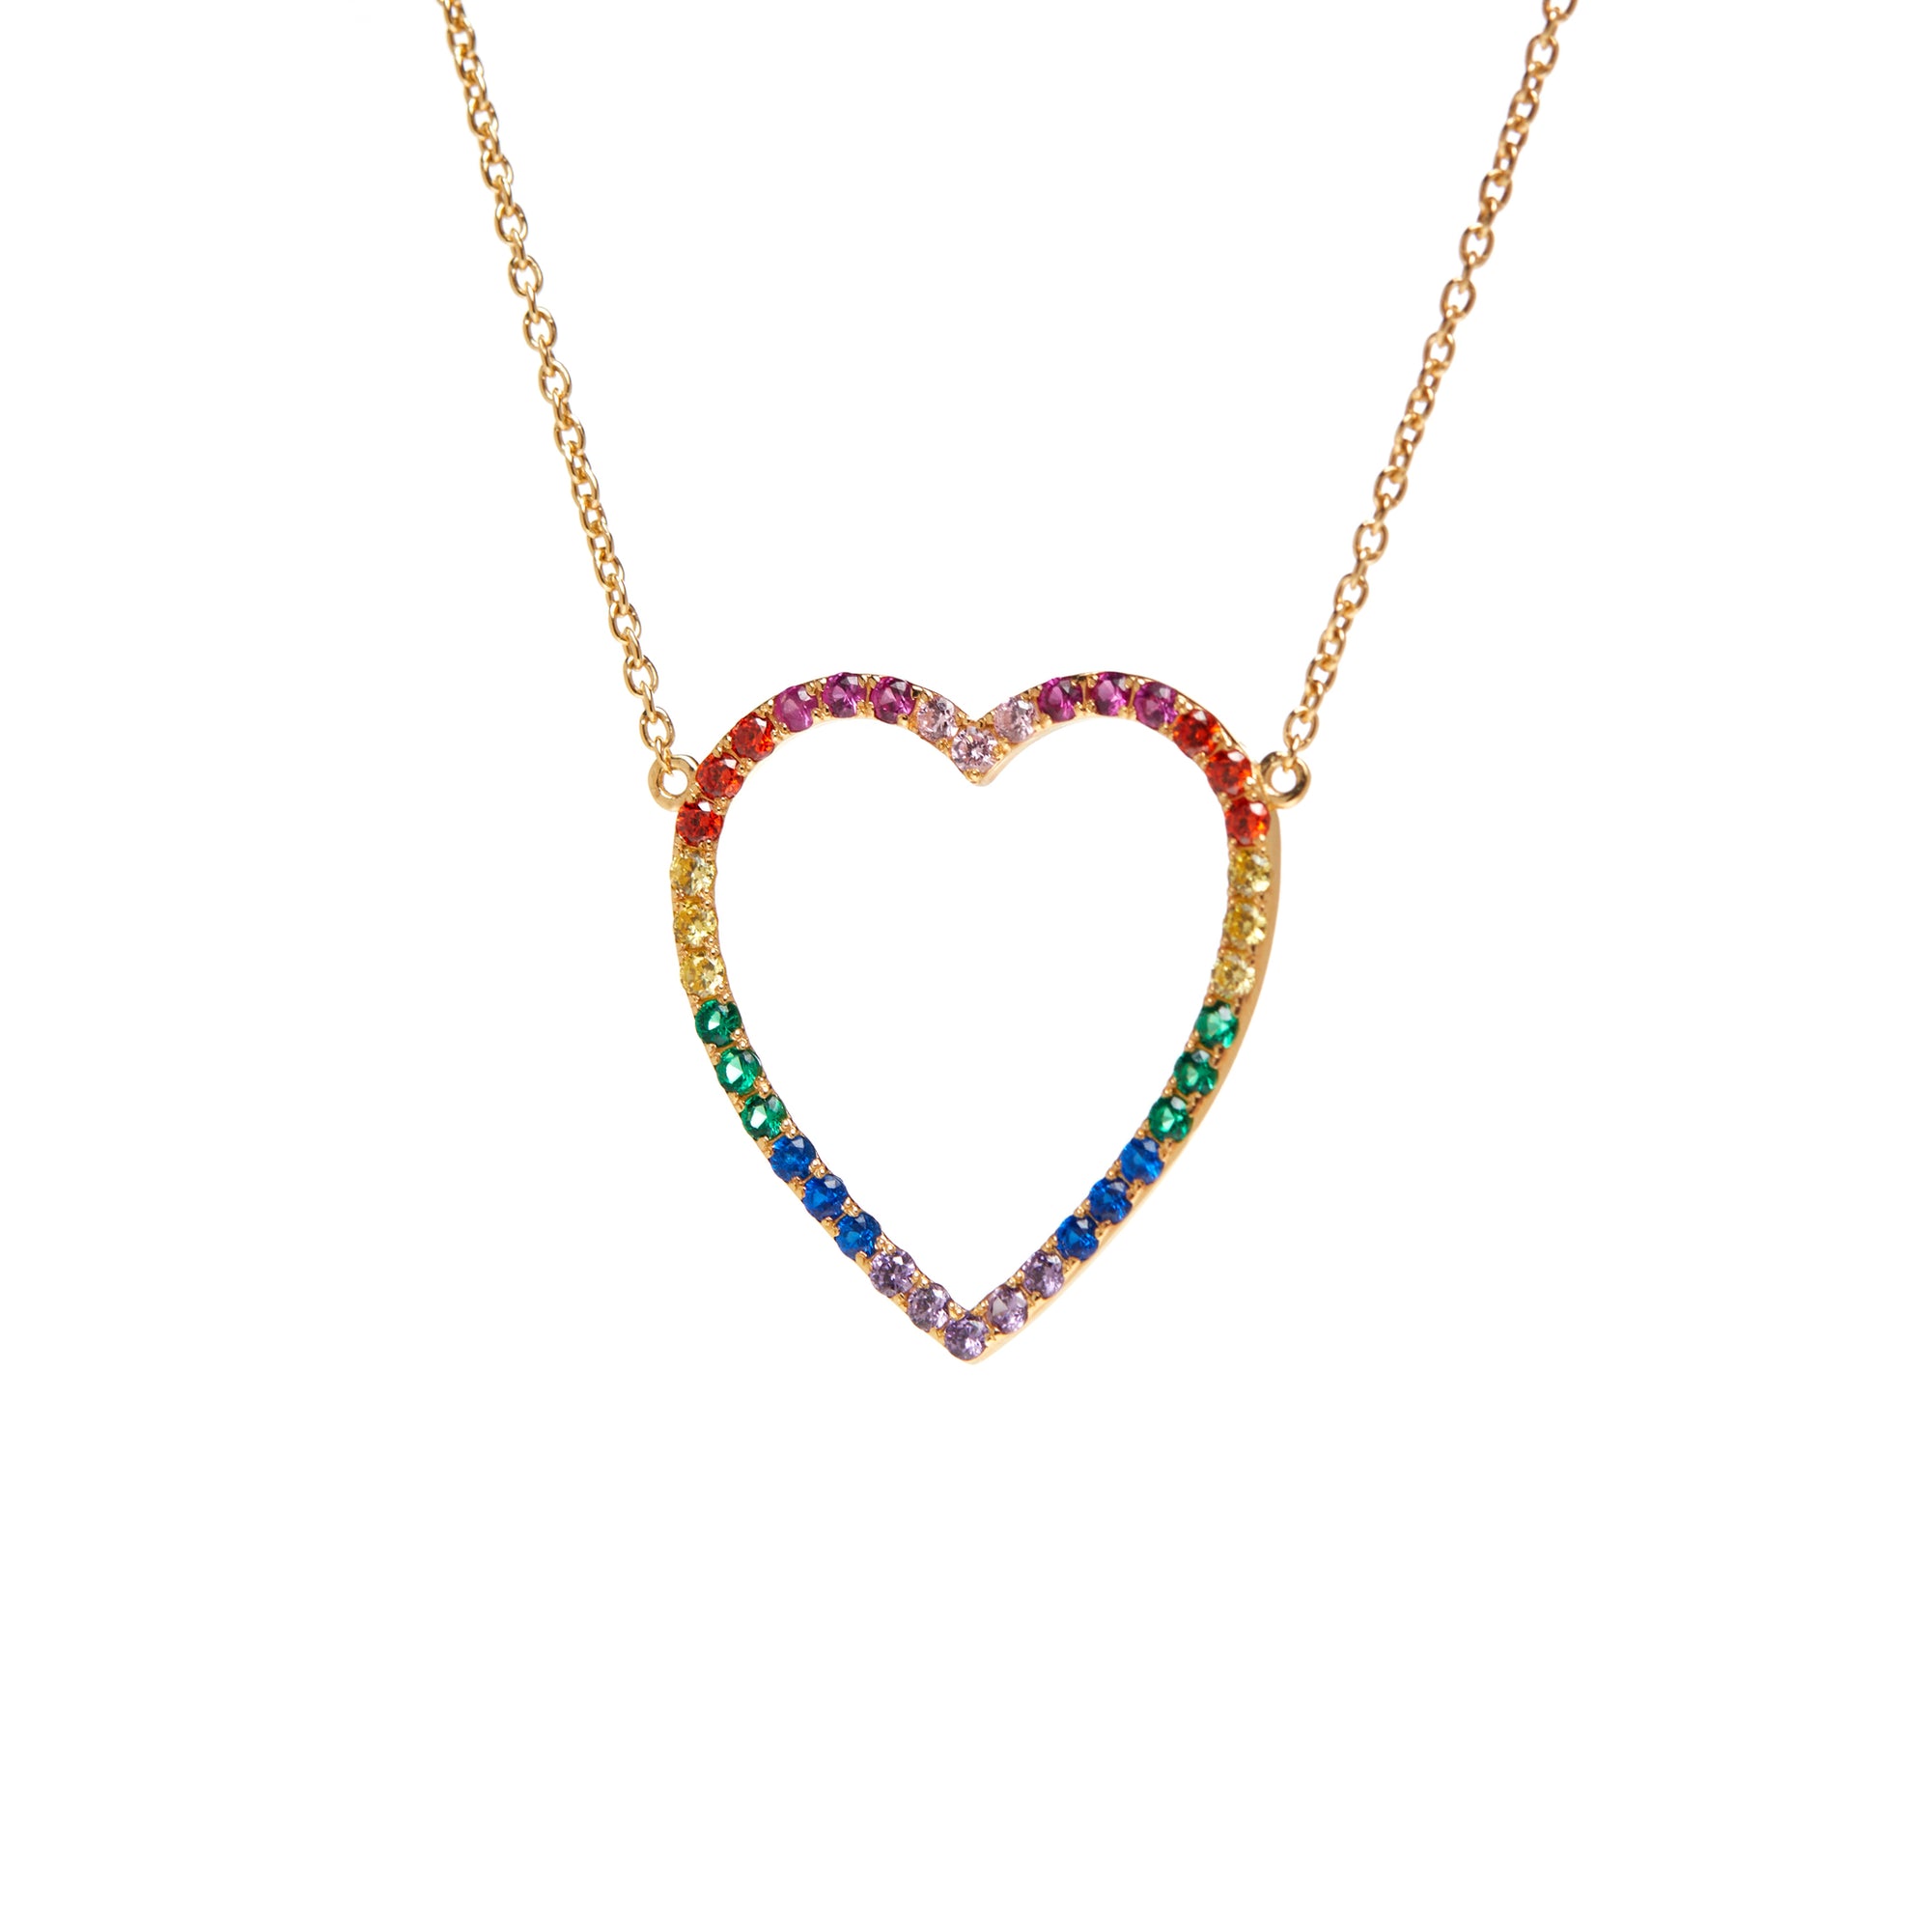 Necklace 'Gold Heart' – Multi